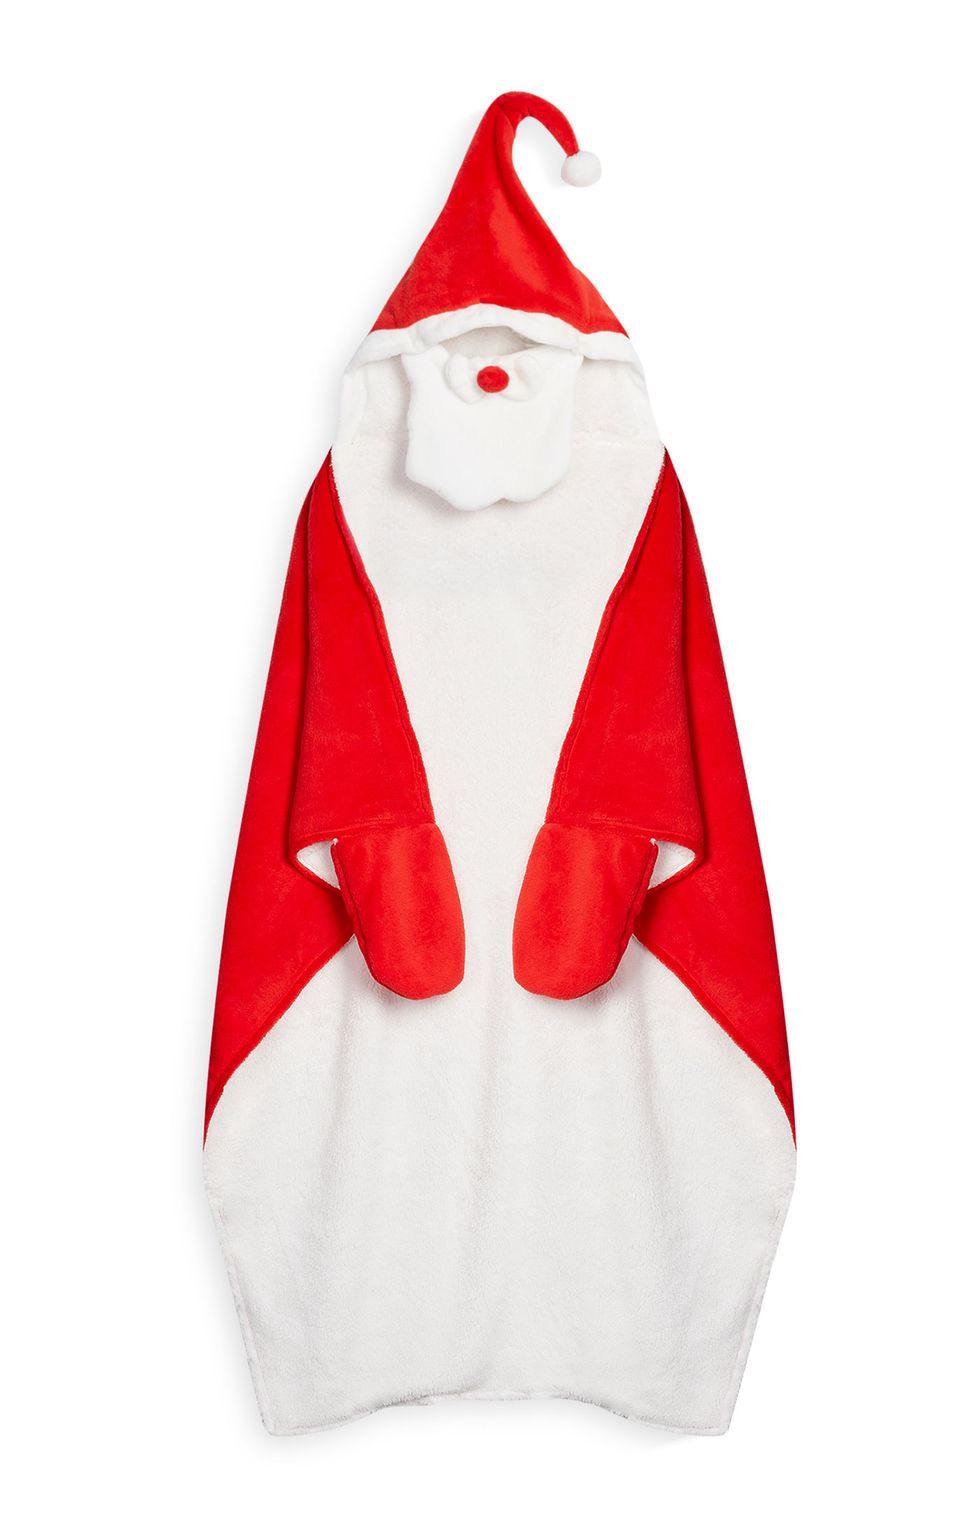 Santa claus, Red, Clothing, Outerwear, Fictional character, Sleeve, Hood, Costume, 